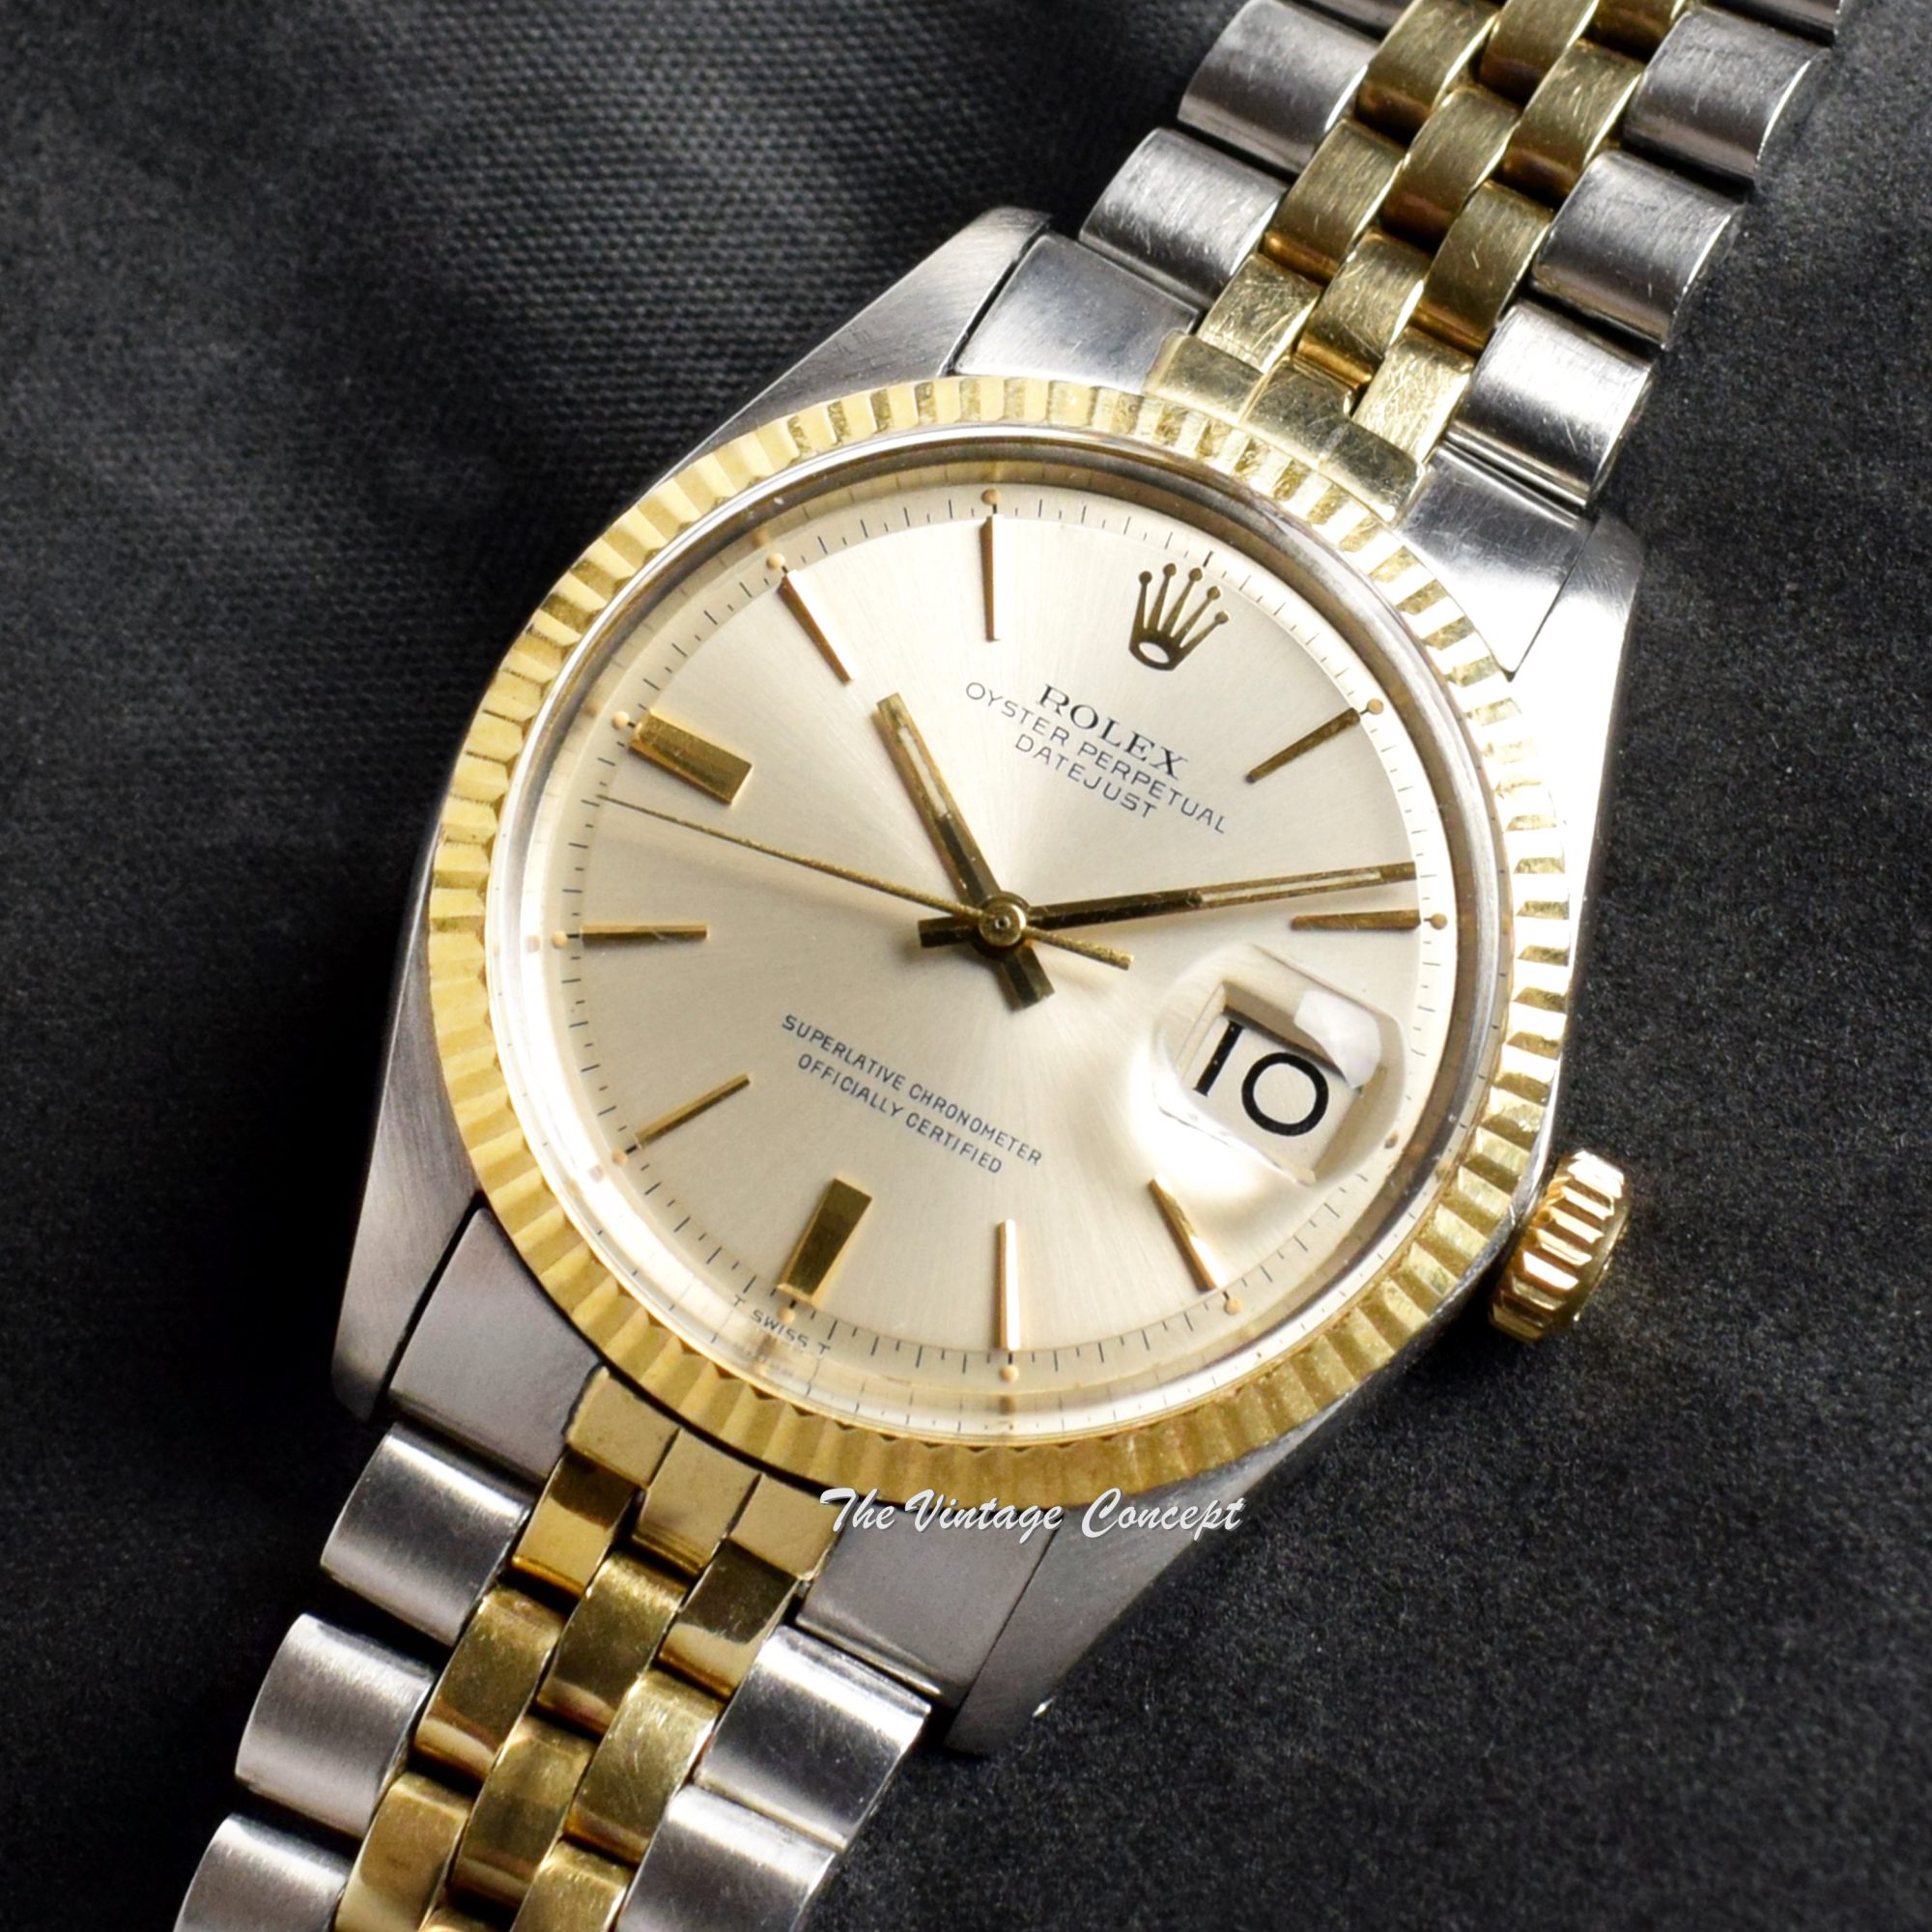 Rolex Datejust Two-Tone Silver Dial 1601 w/ Double Punched Papers - The Vintage Concept